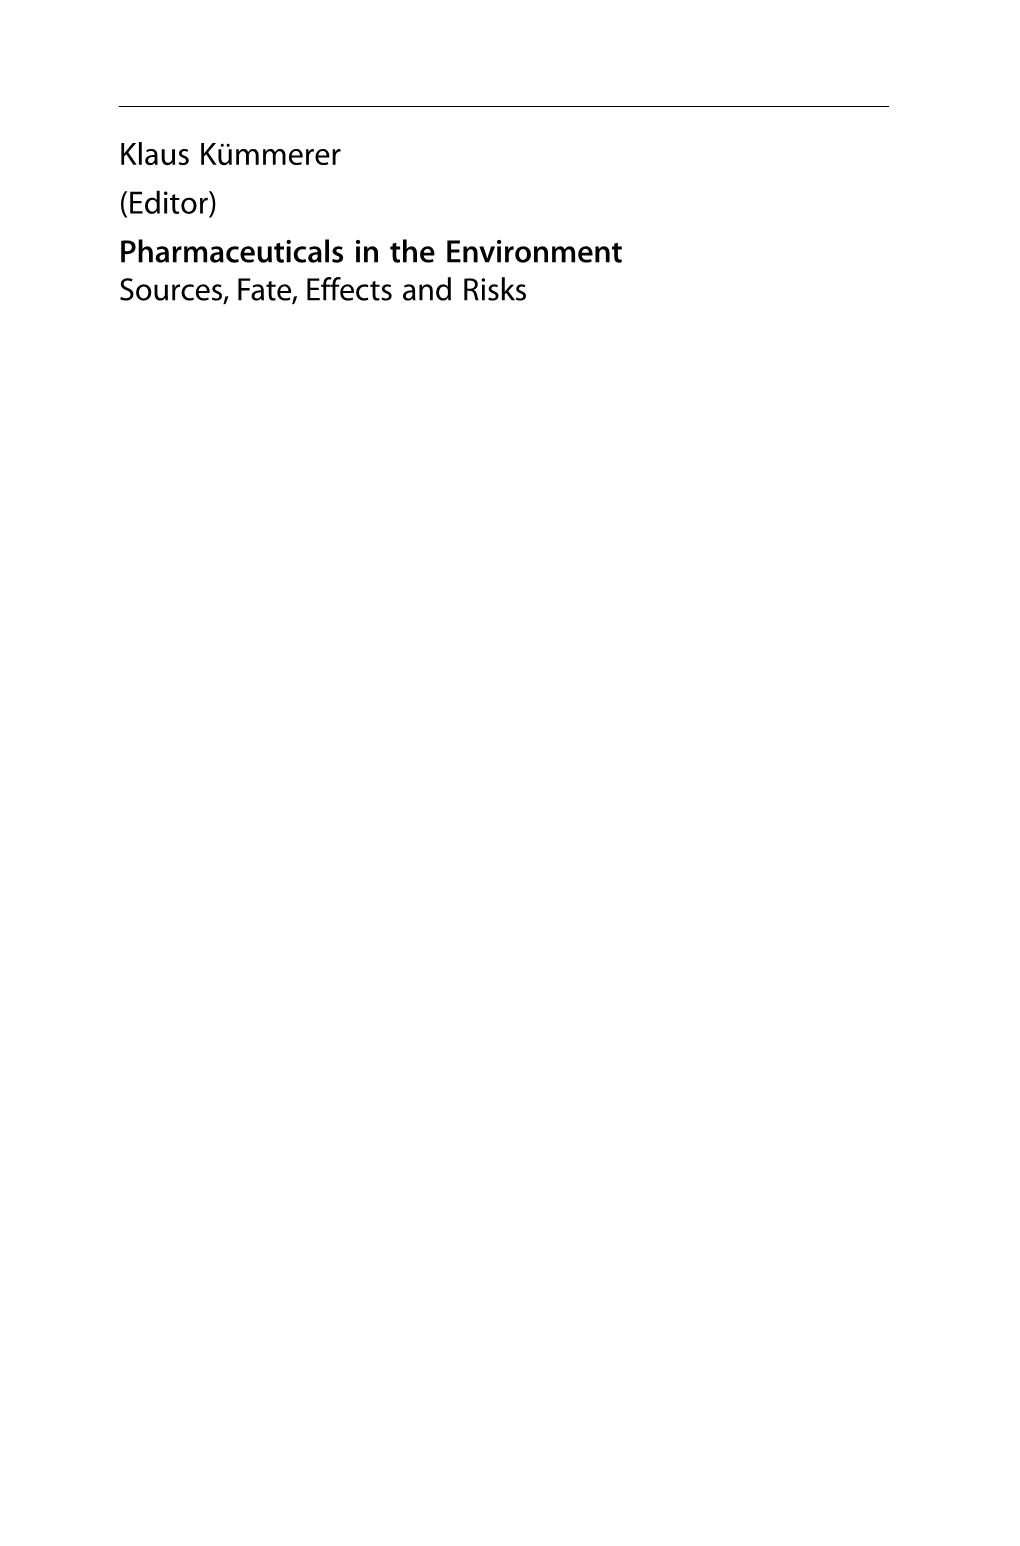 Pharmaceuticals in the Environment Sources, Fate, Effects and Risks Klaus Kümmerer (Editor)